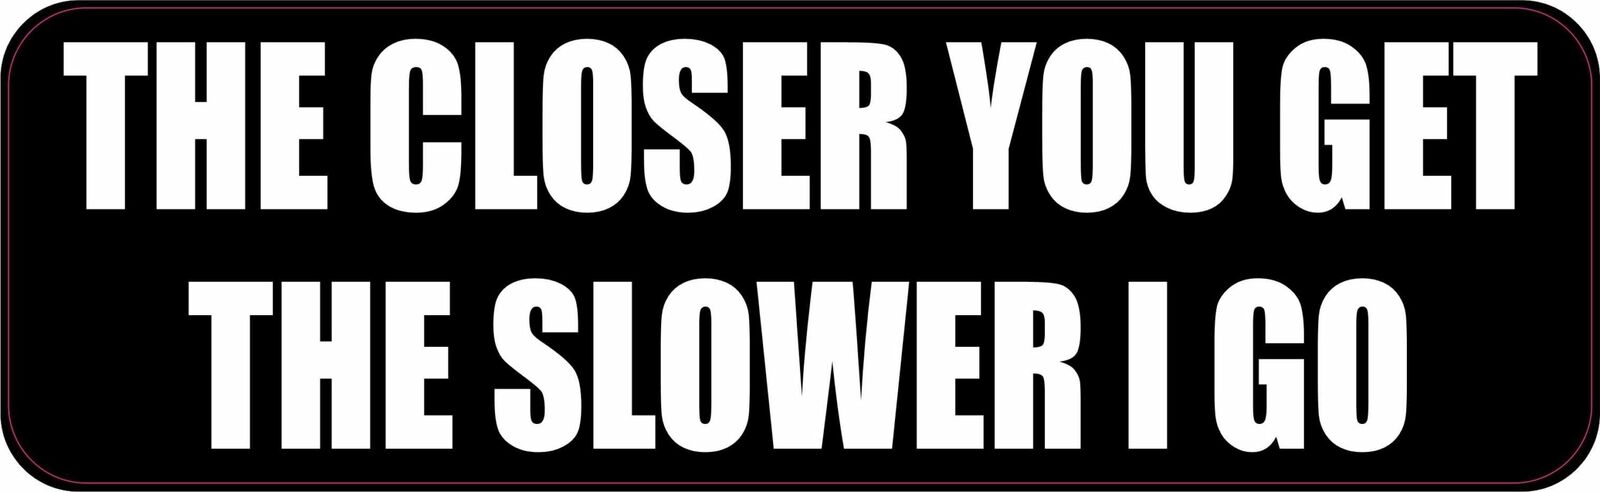 10in x 3in The Closer You Get the Slower I Go Vinyl Sticker Vehicle Bumper Decal